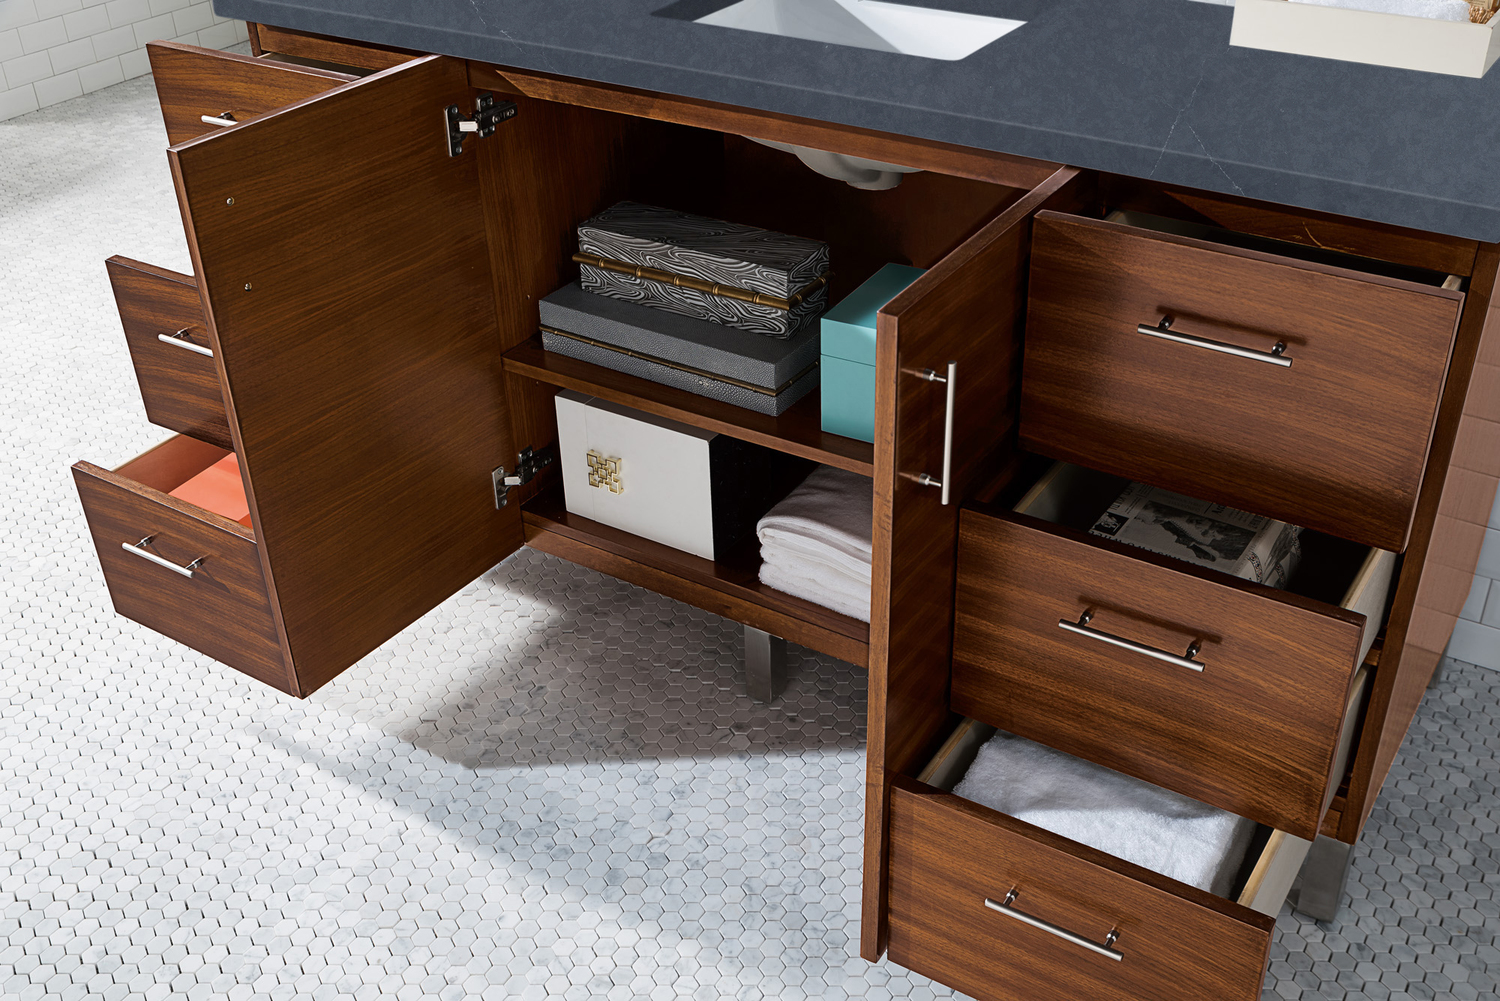 30 vanity with drawers James Martin Vanity American Walnut Contemporary/Modern, Transitional